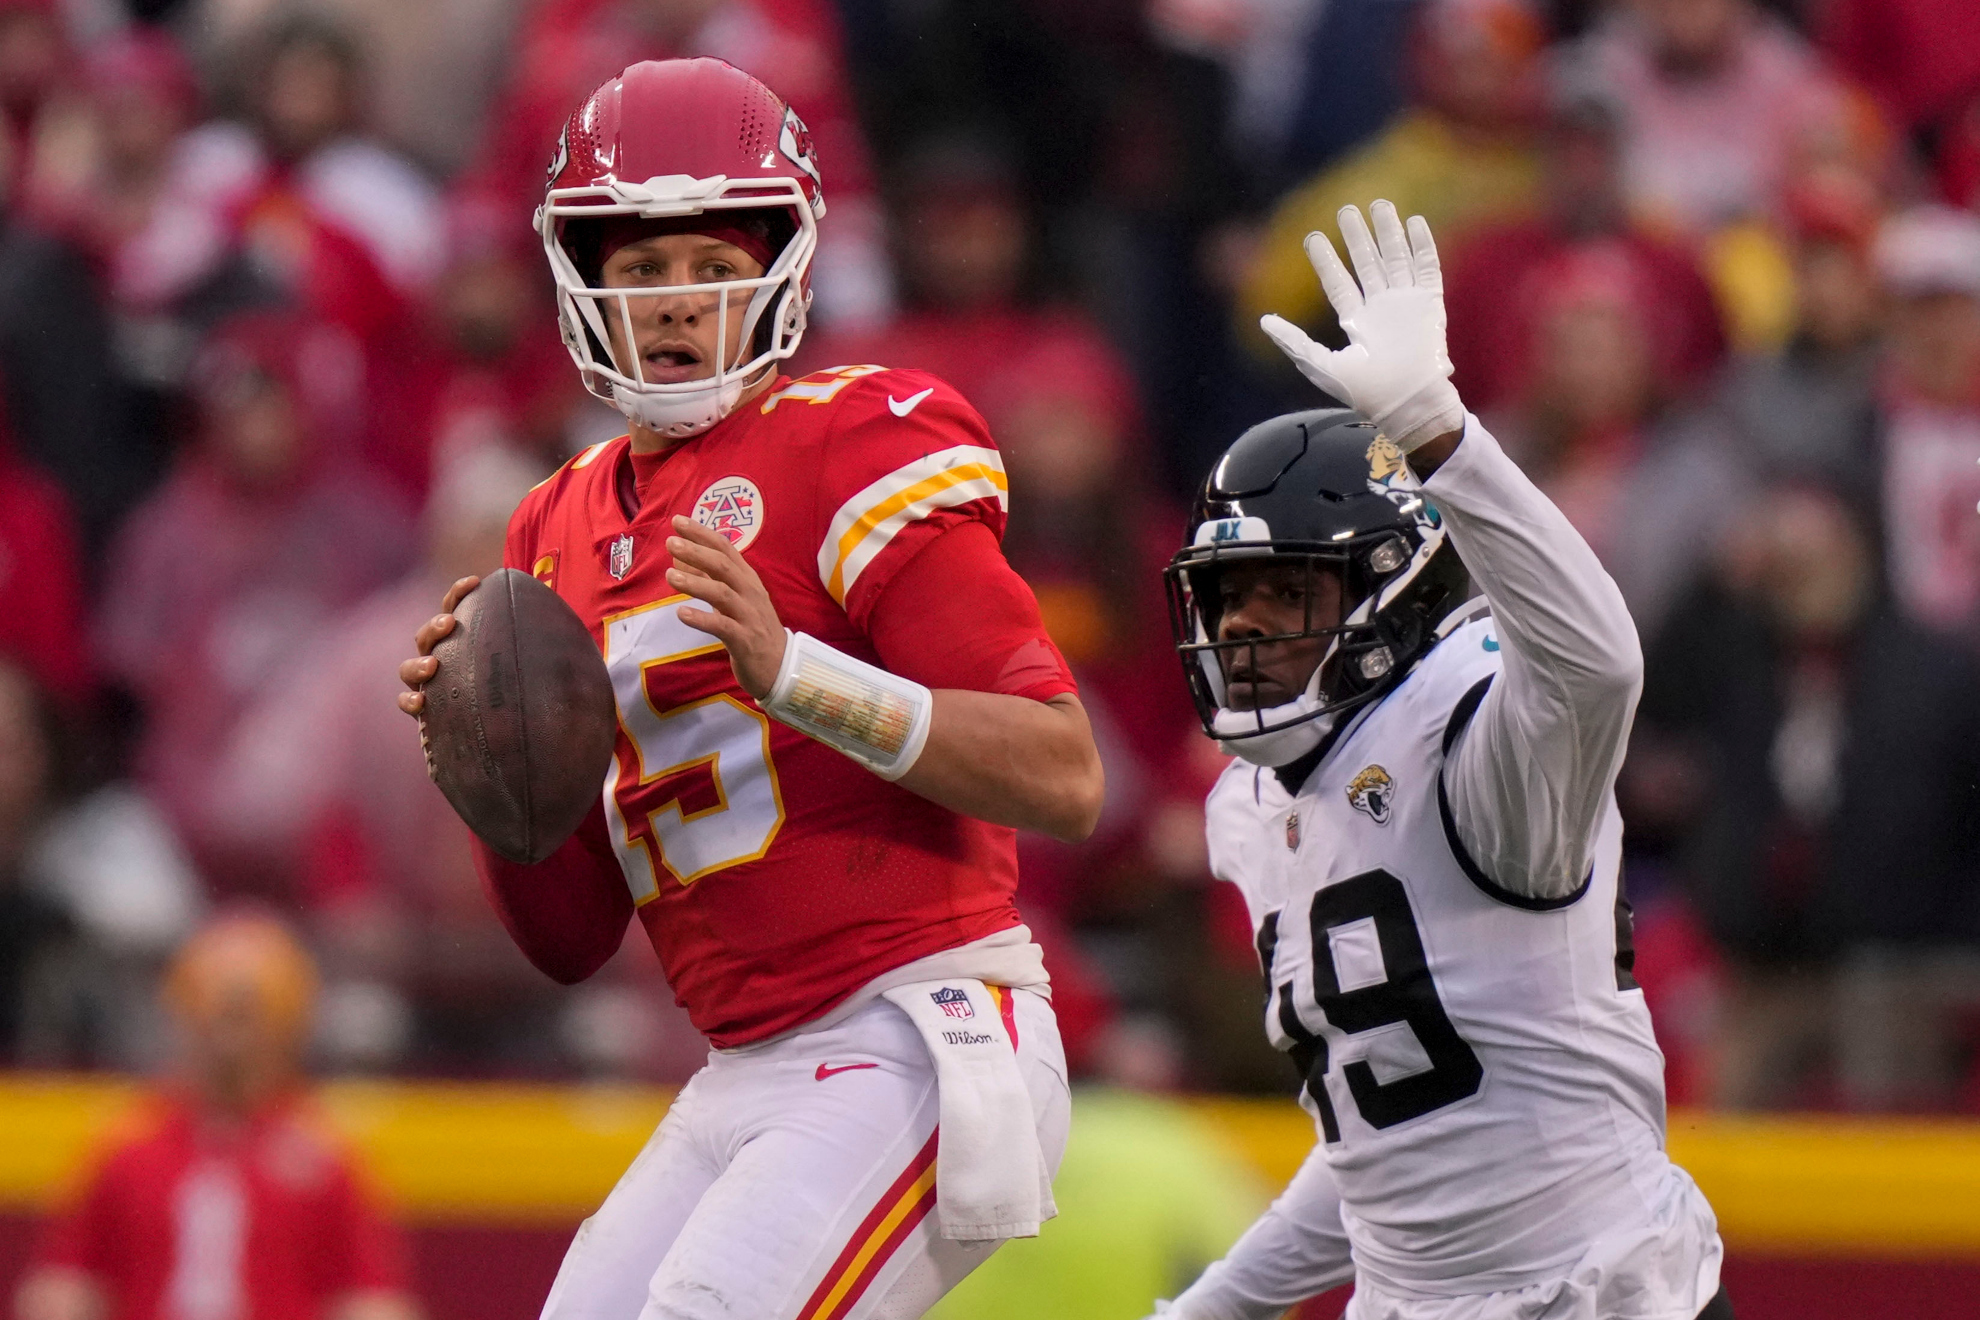 Jaguars - Chiefs: Final score, full highlights and play-by-play